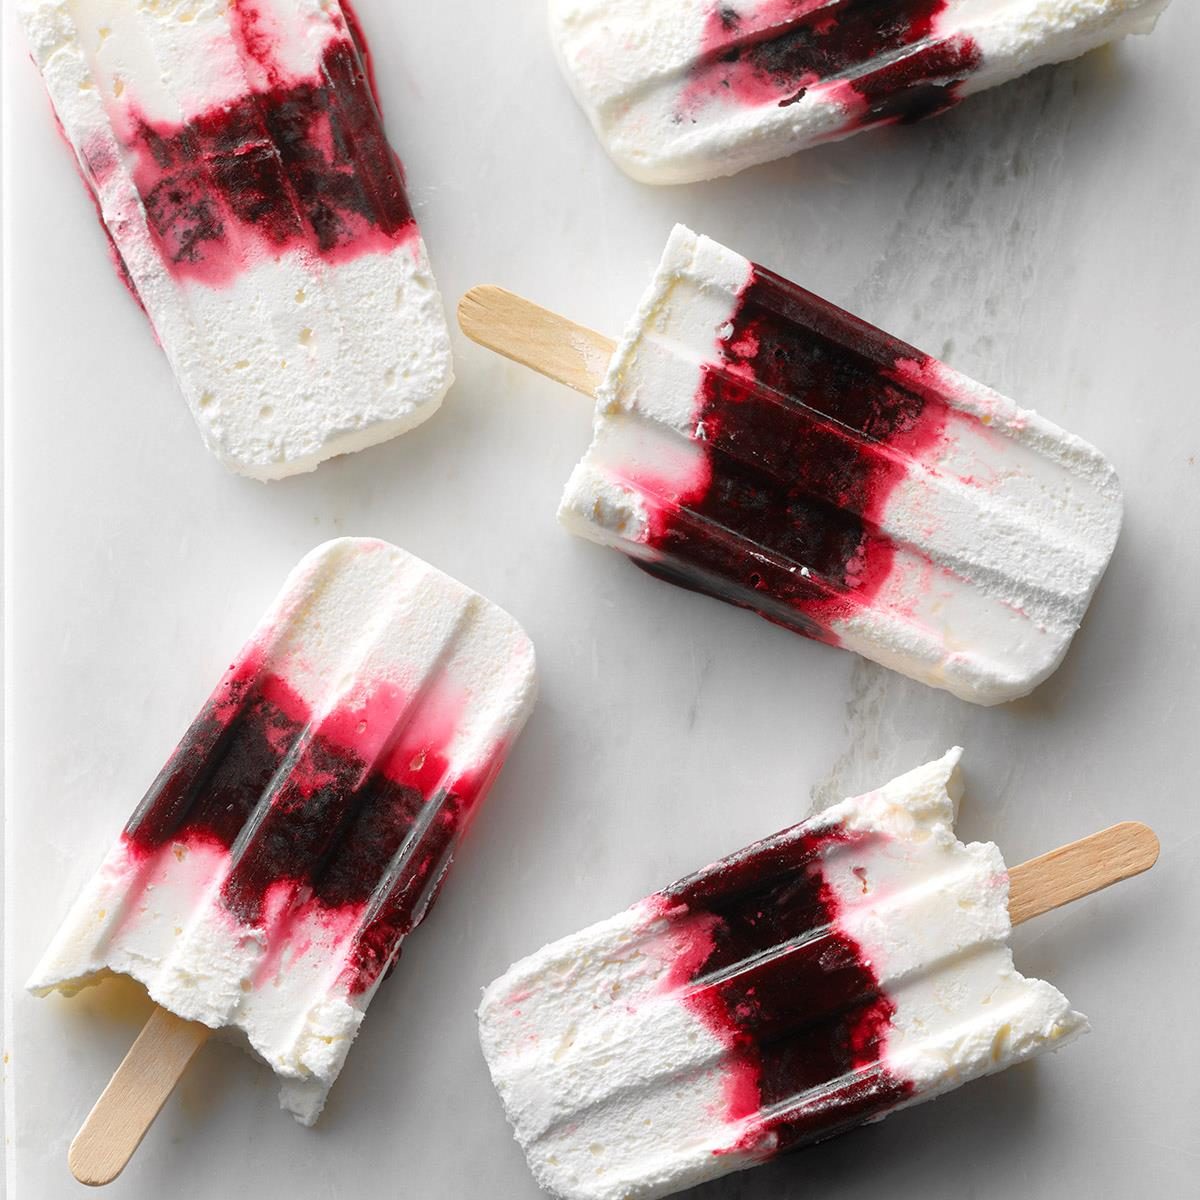 Day 15: Creamy Layered Blueberry Ice Pops